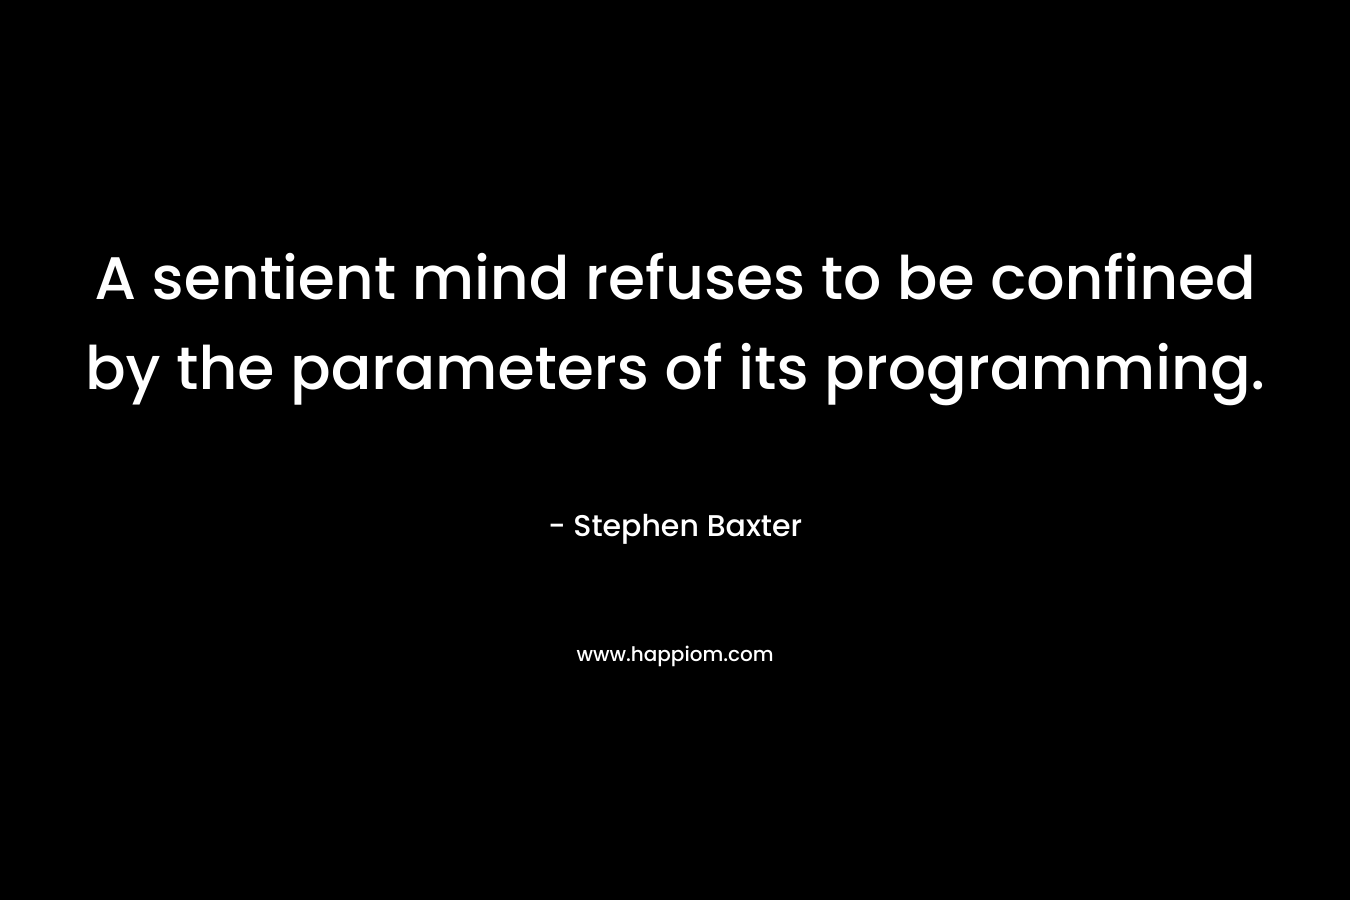 A sentient mind refuses to be confined by the parameters of its programming. – Stephen Baxter